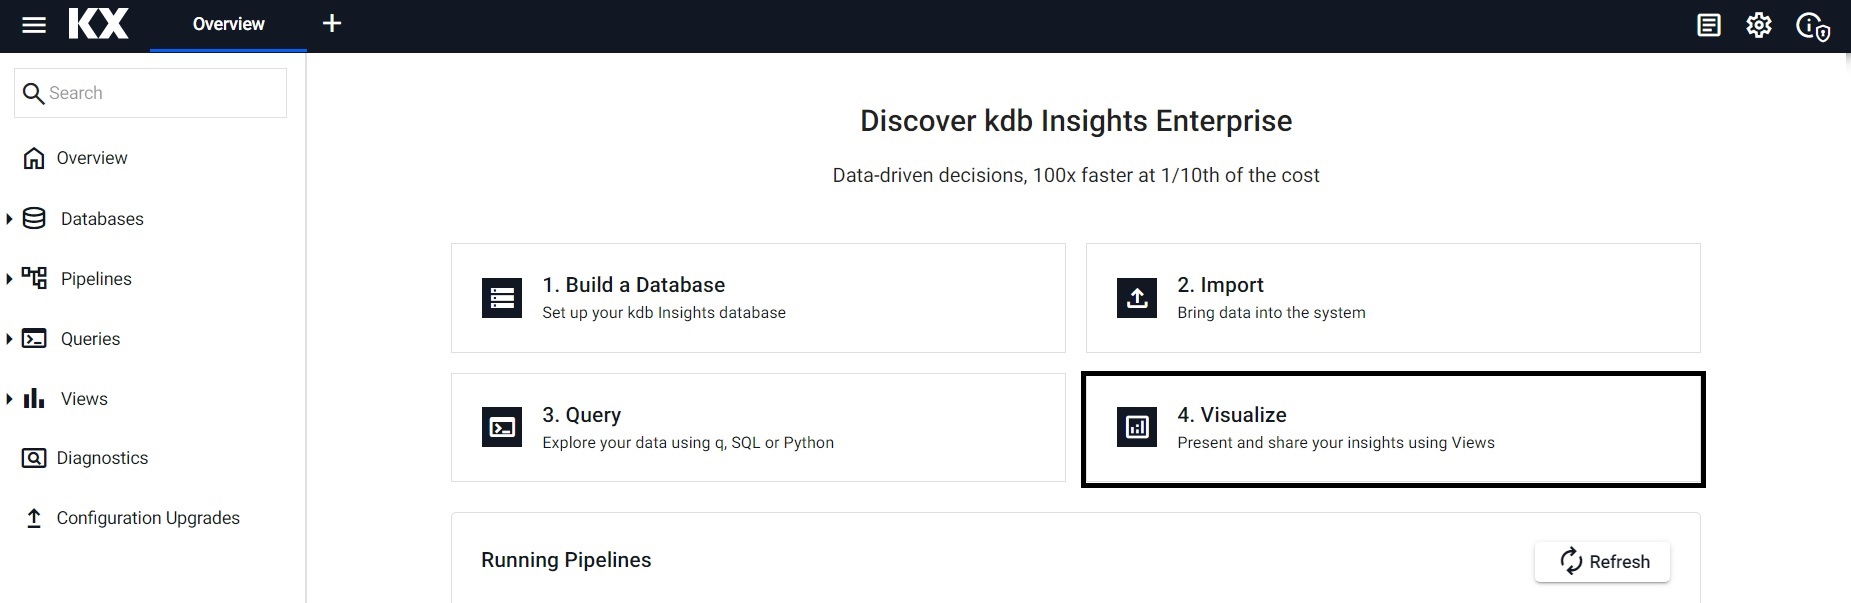 Create a view from Visualize of "Discover kdb Insights Enterprise".